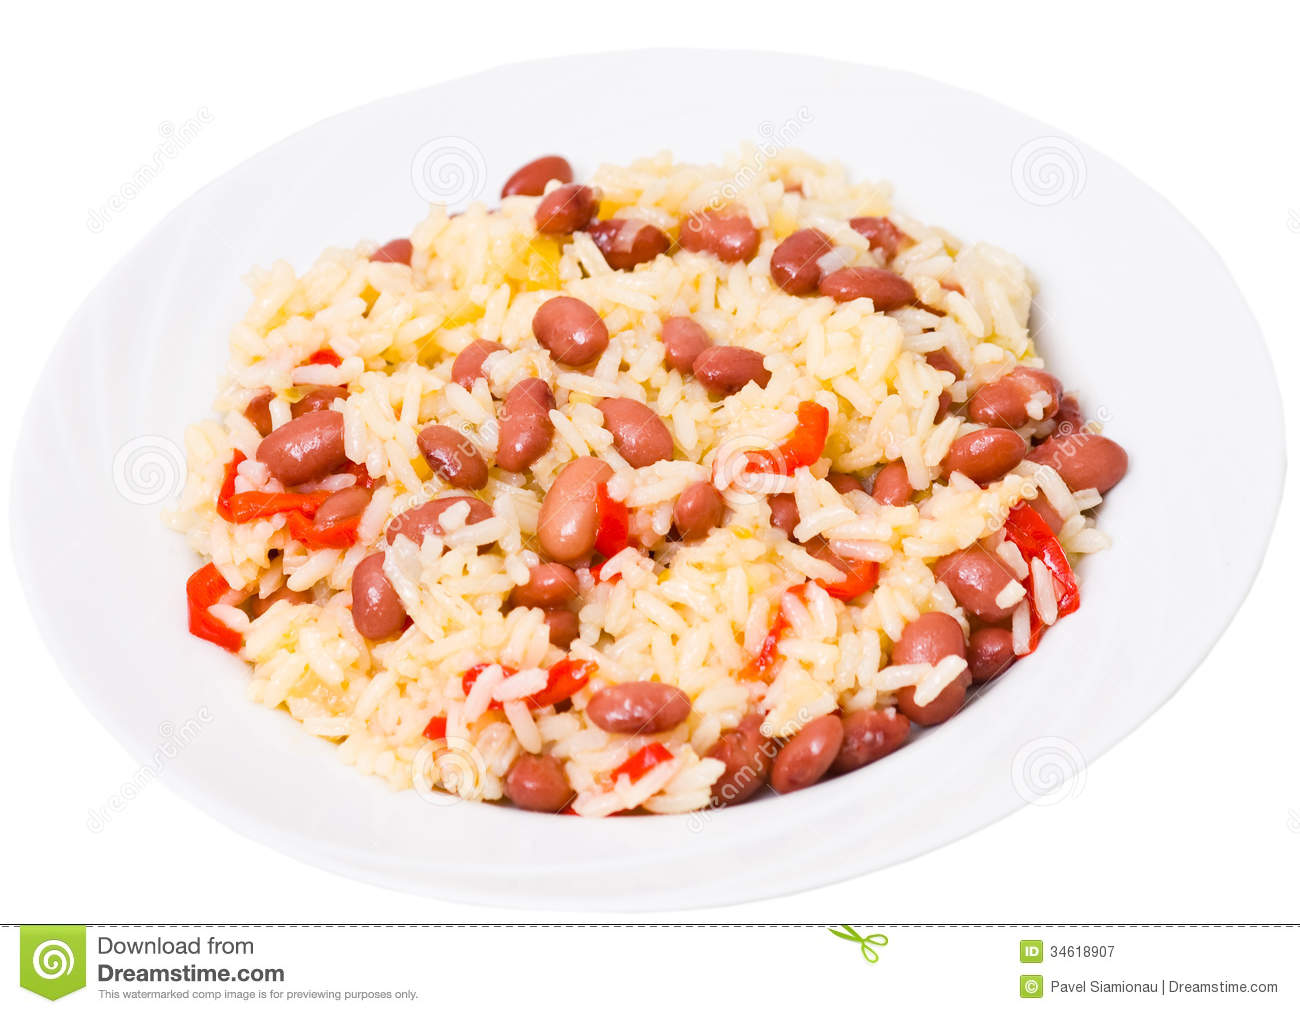 Rice With Red Beans Royalty Free Stock Photography   Image  34618907